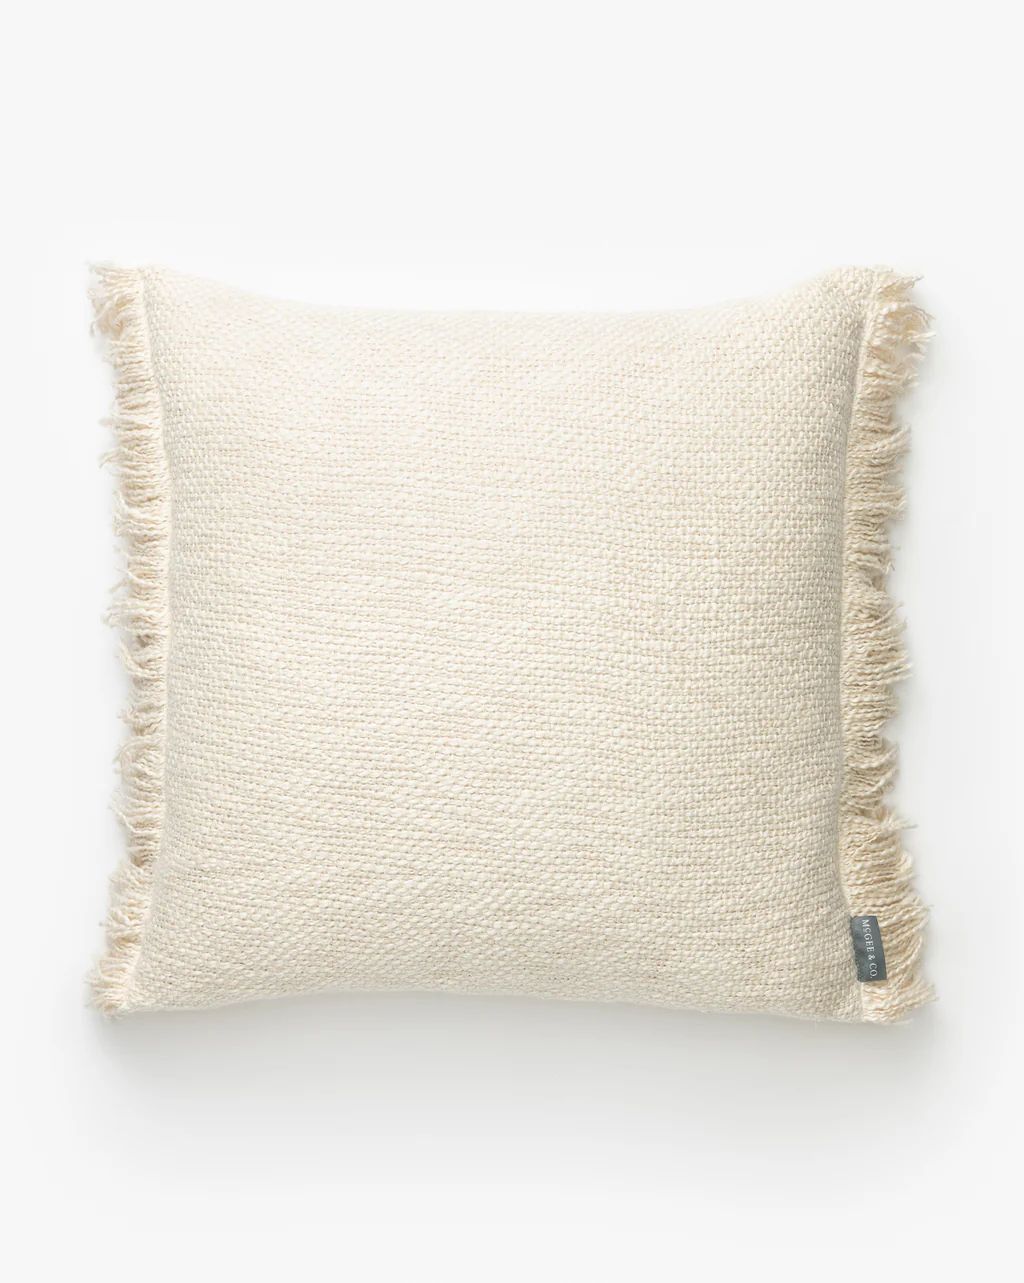 Aisling Pillow Cover | McGee & Co. (US)